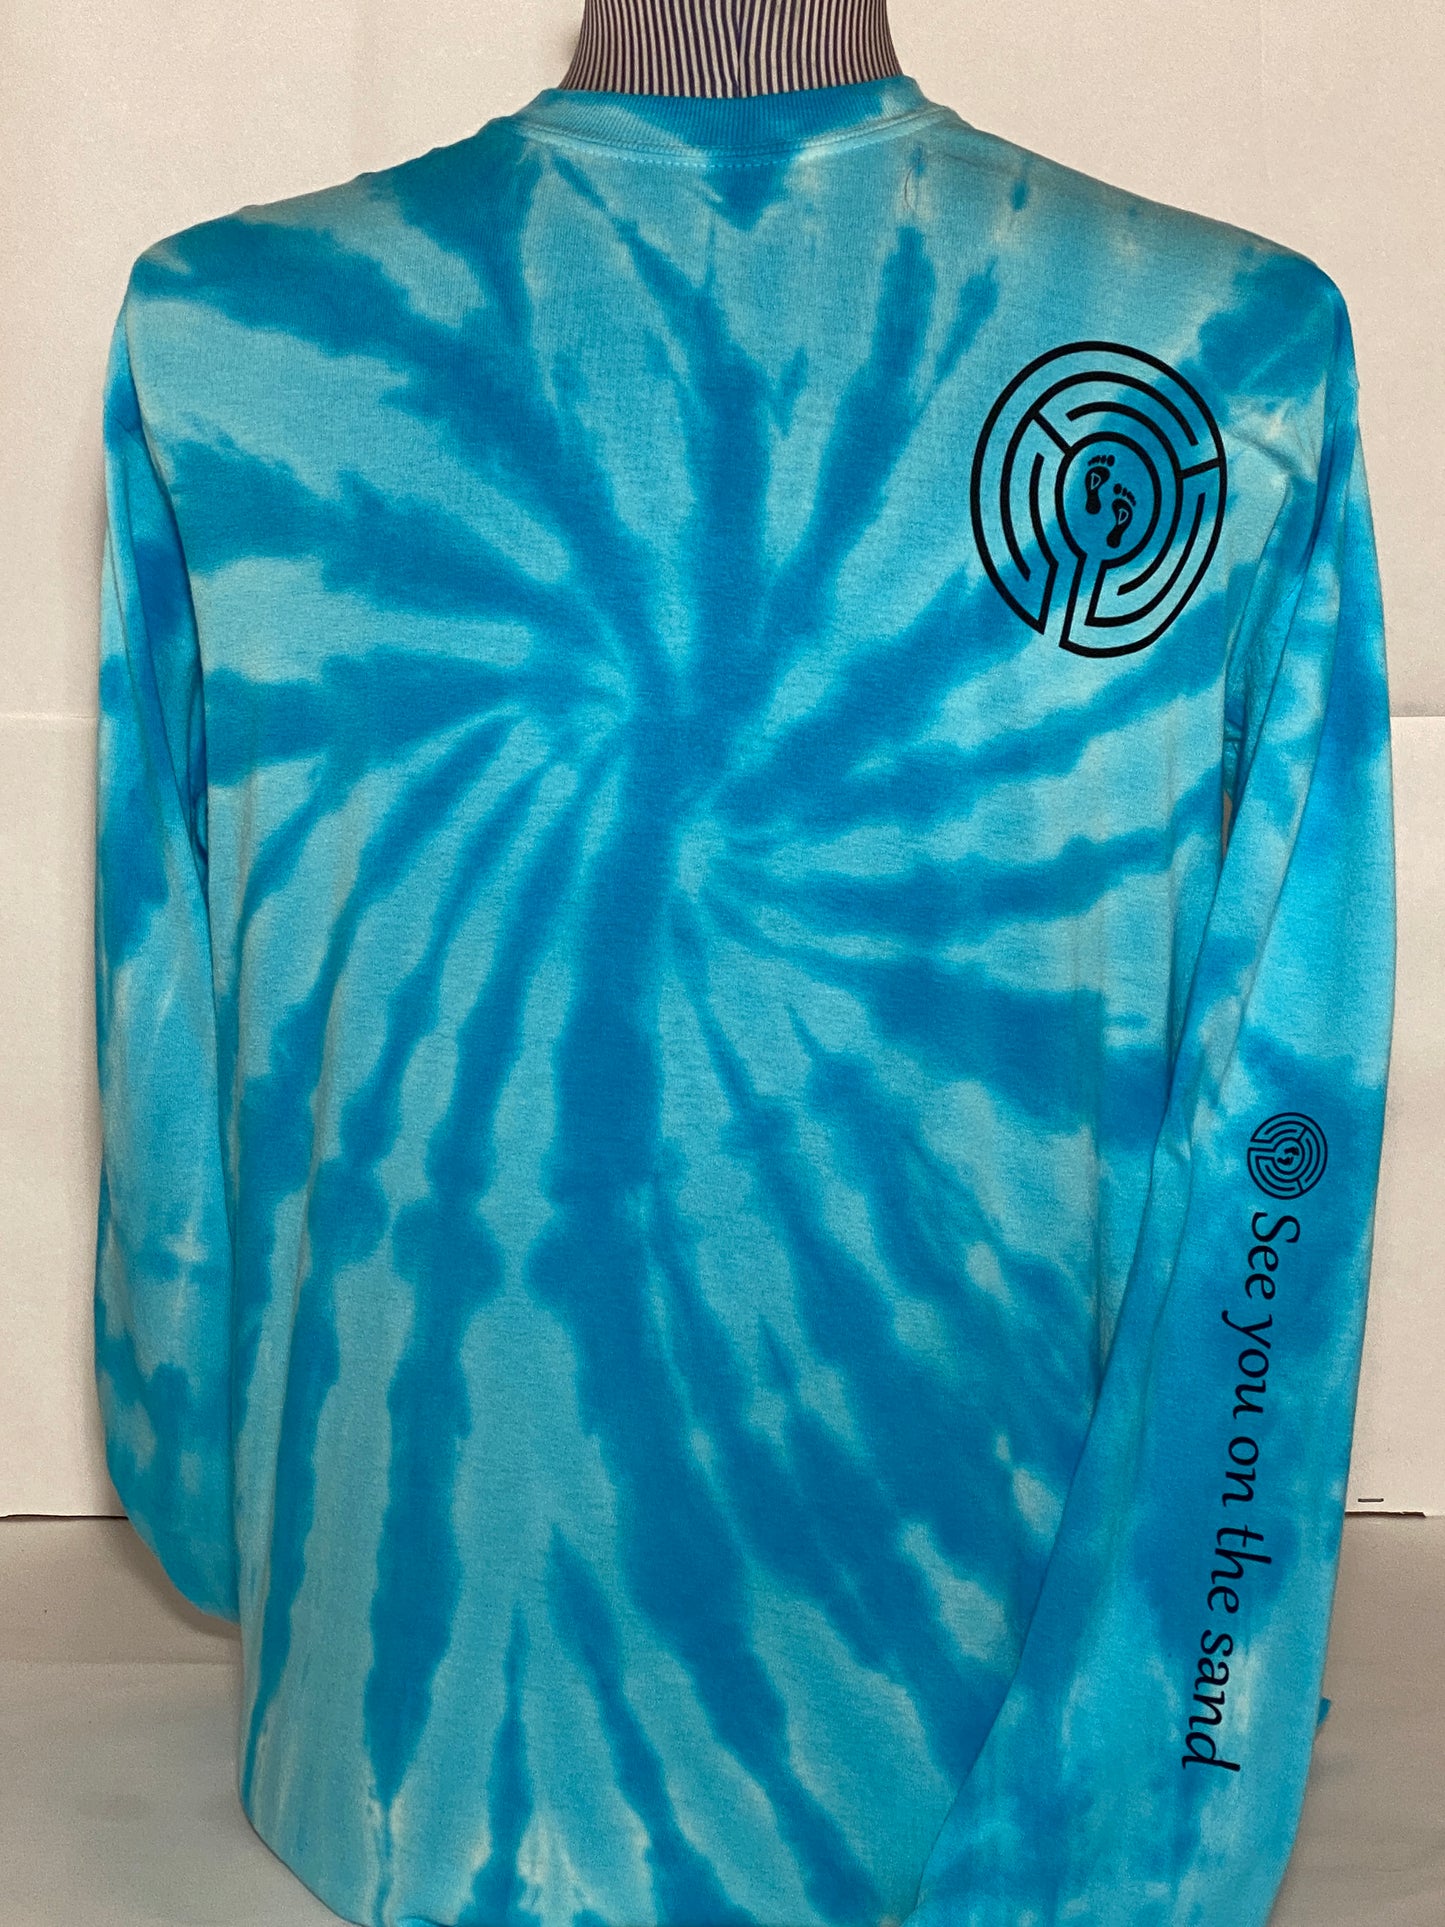 "See you on the sand" Tie-dyed Turquoise Unisex Long-sleeved T-shirt